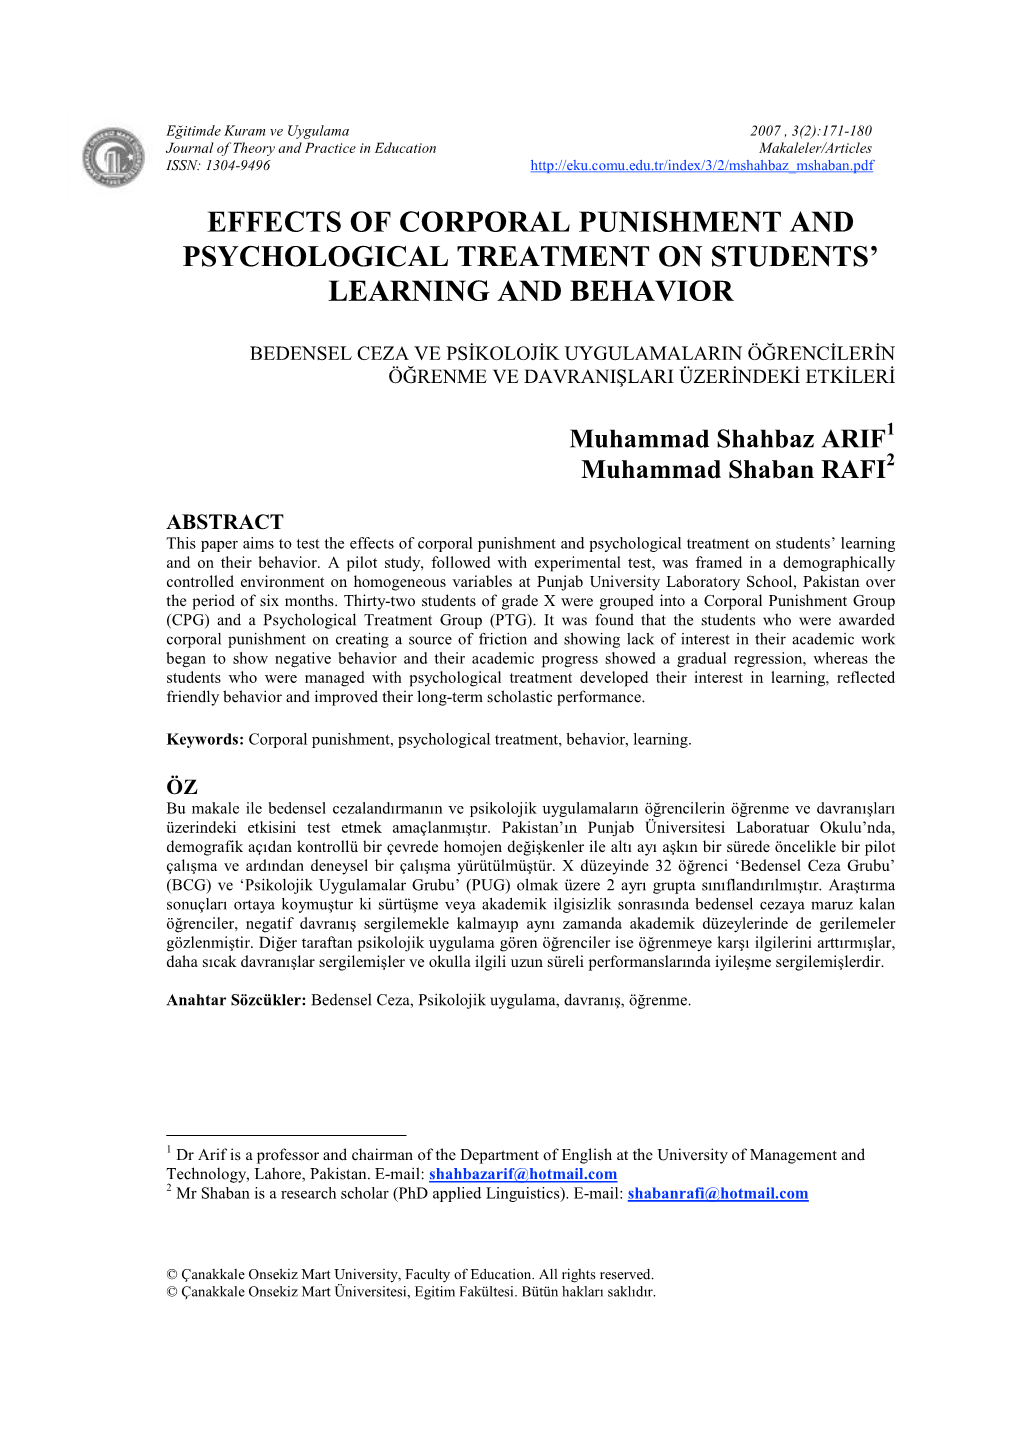 Effects of Corporal Punishment and Psychological Treatment on Students’ Learning and Behavior